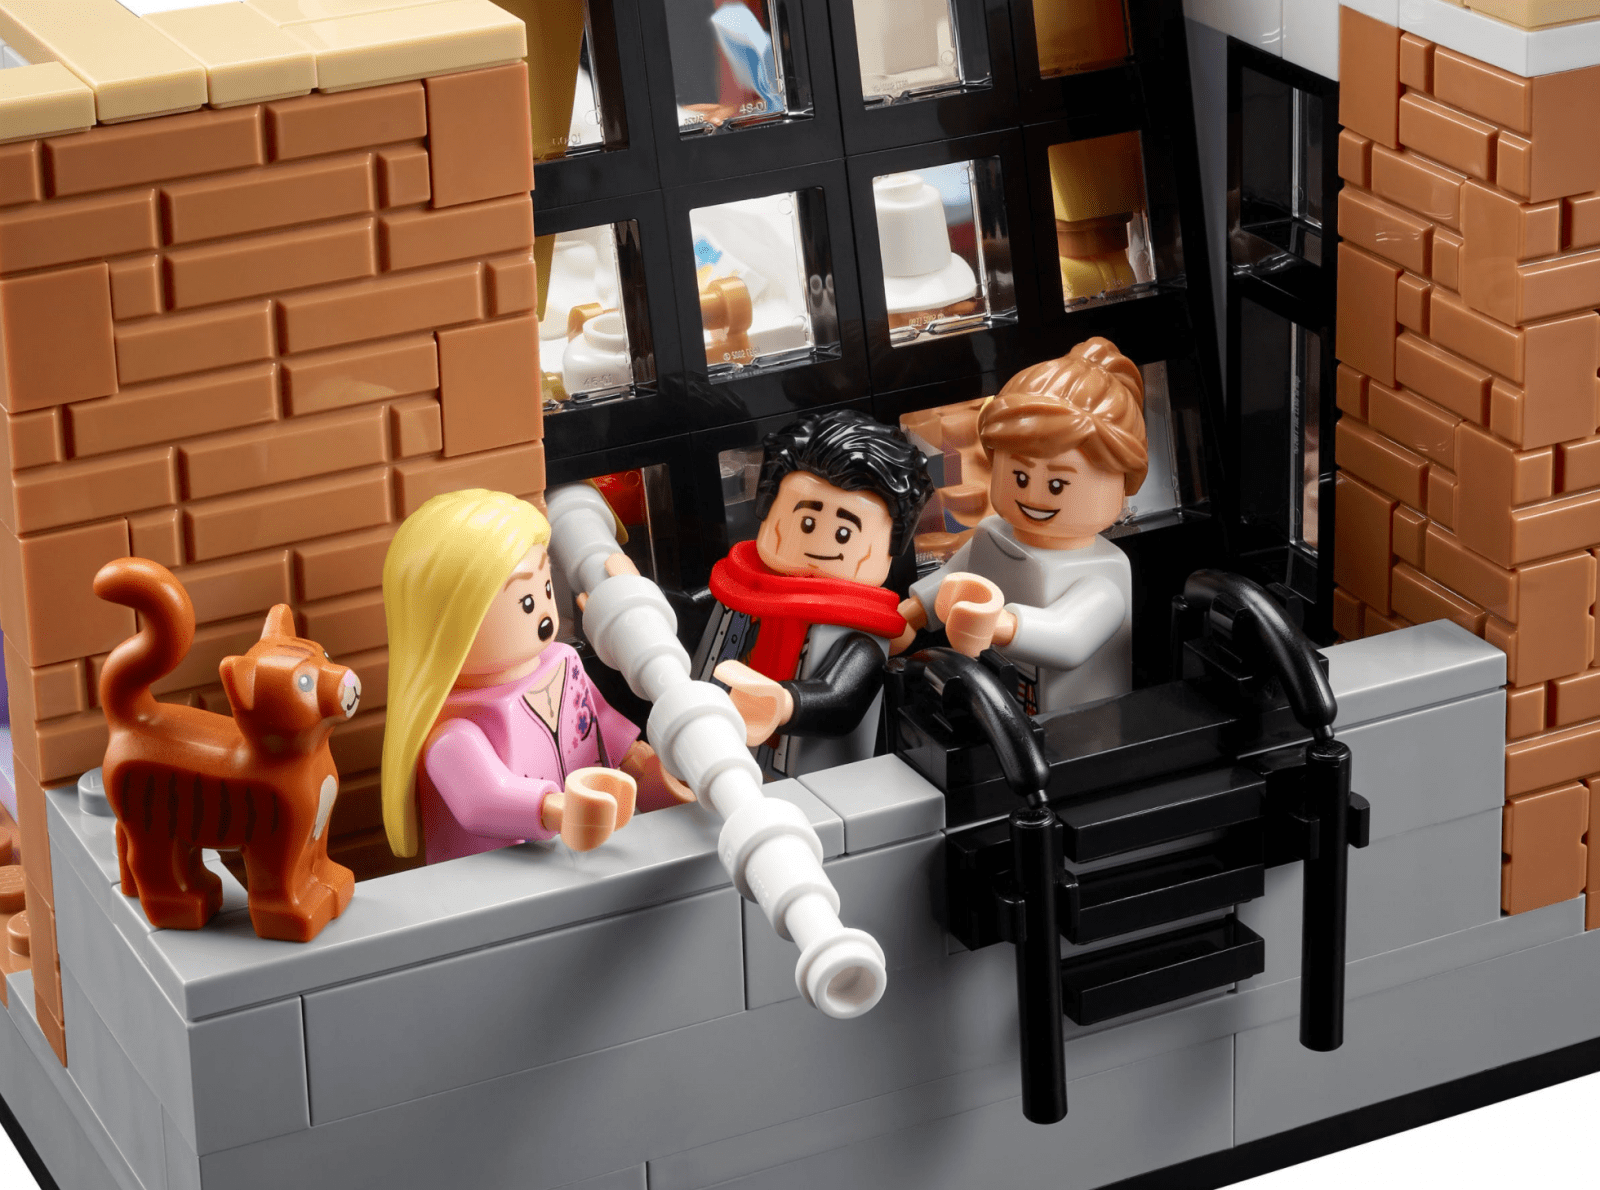 You can recreate the iconic apartments from Friends with this new LEGO set, The Manc